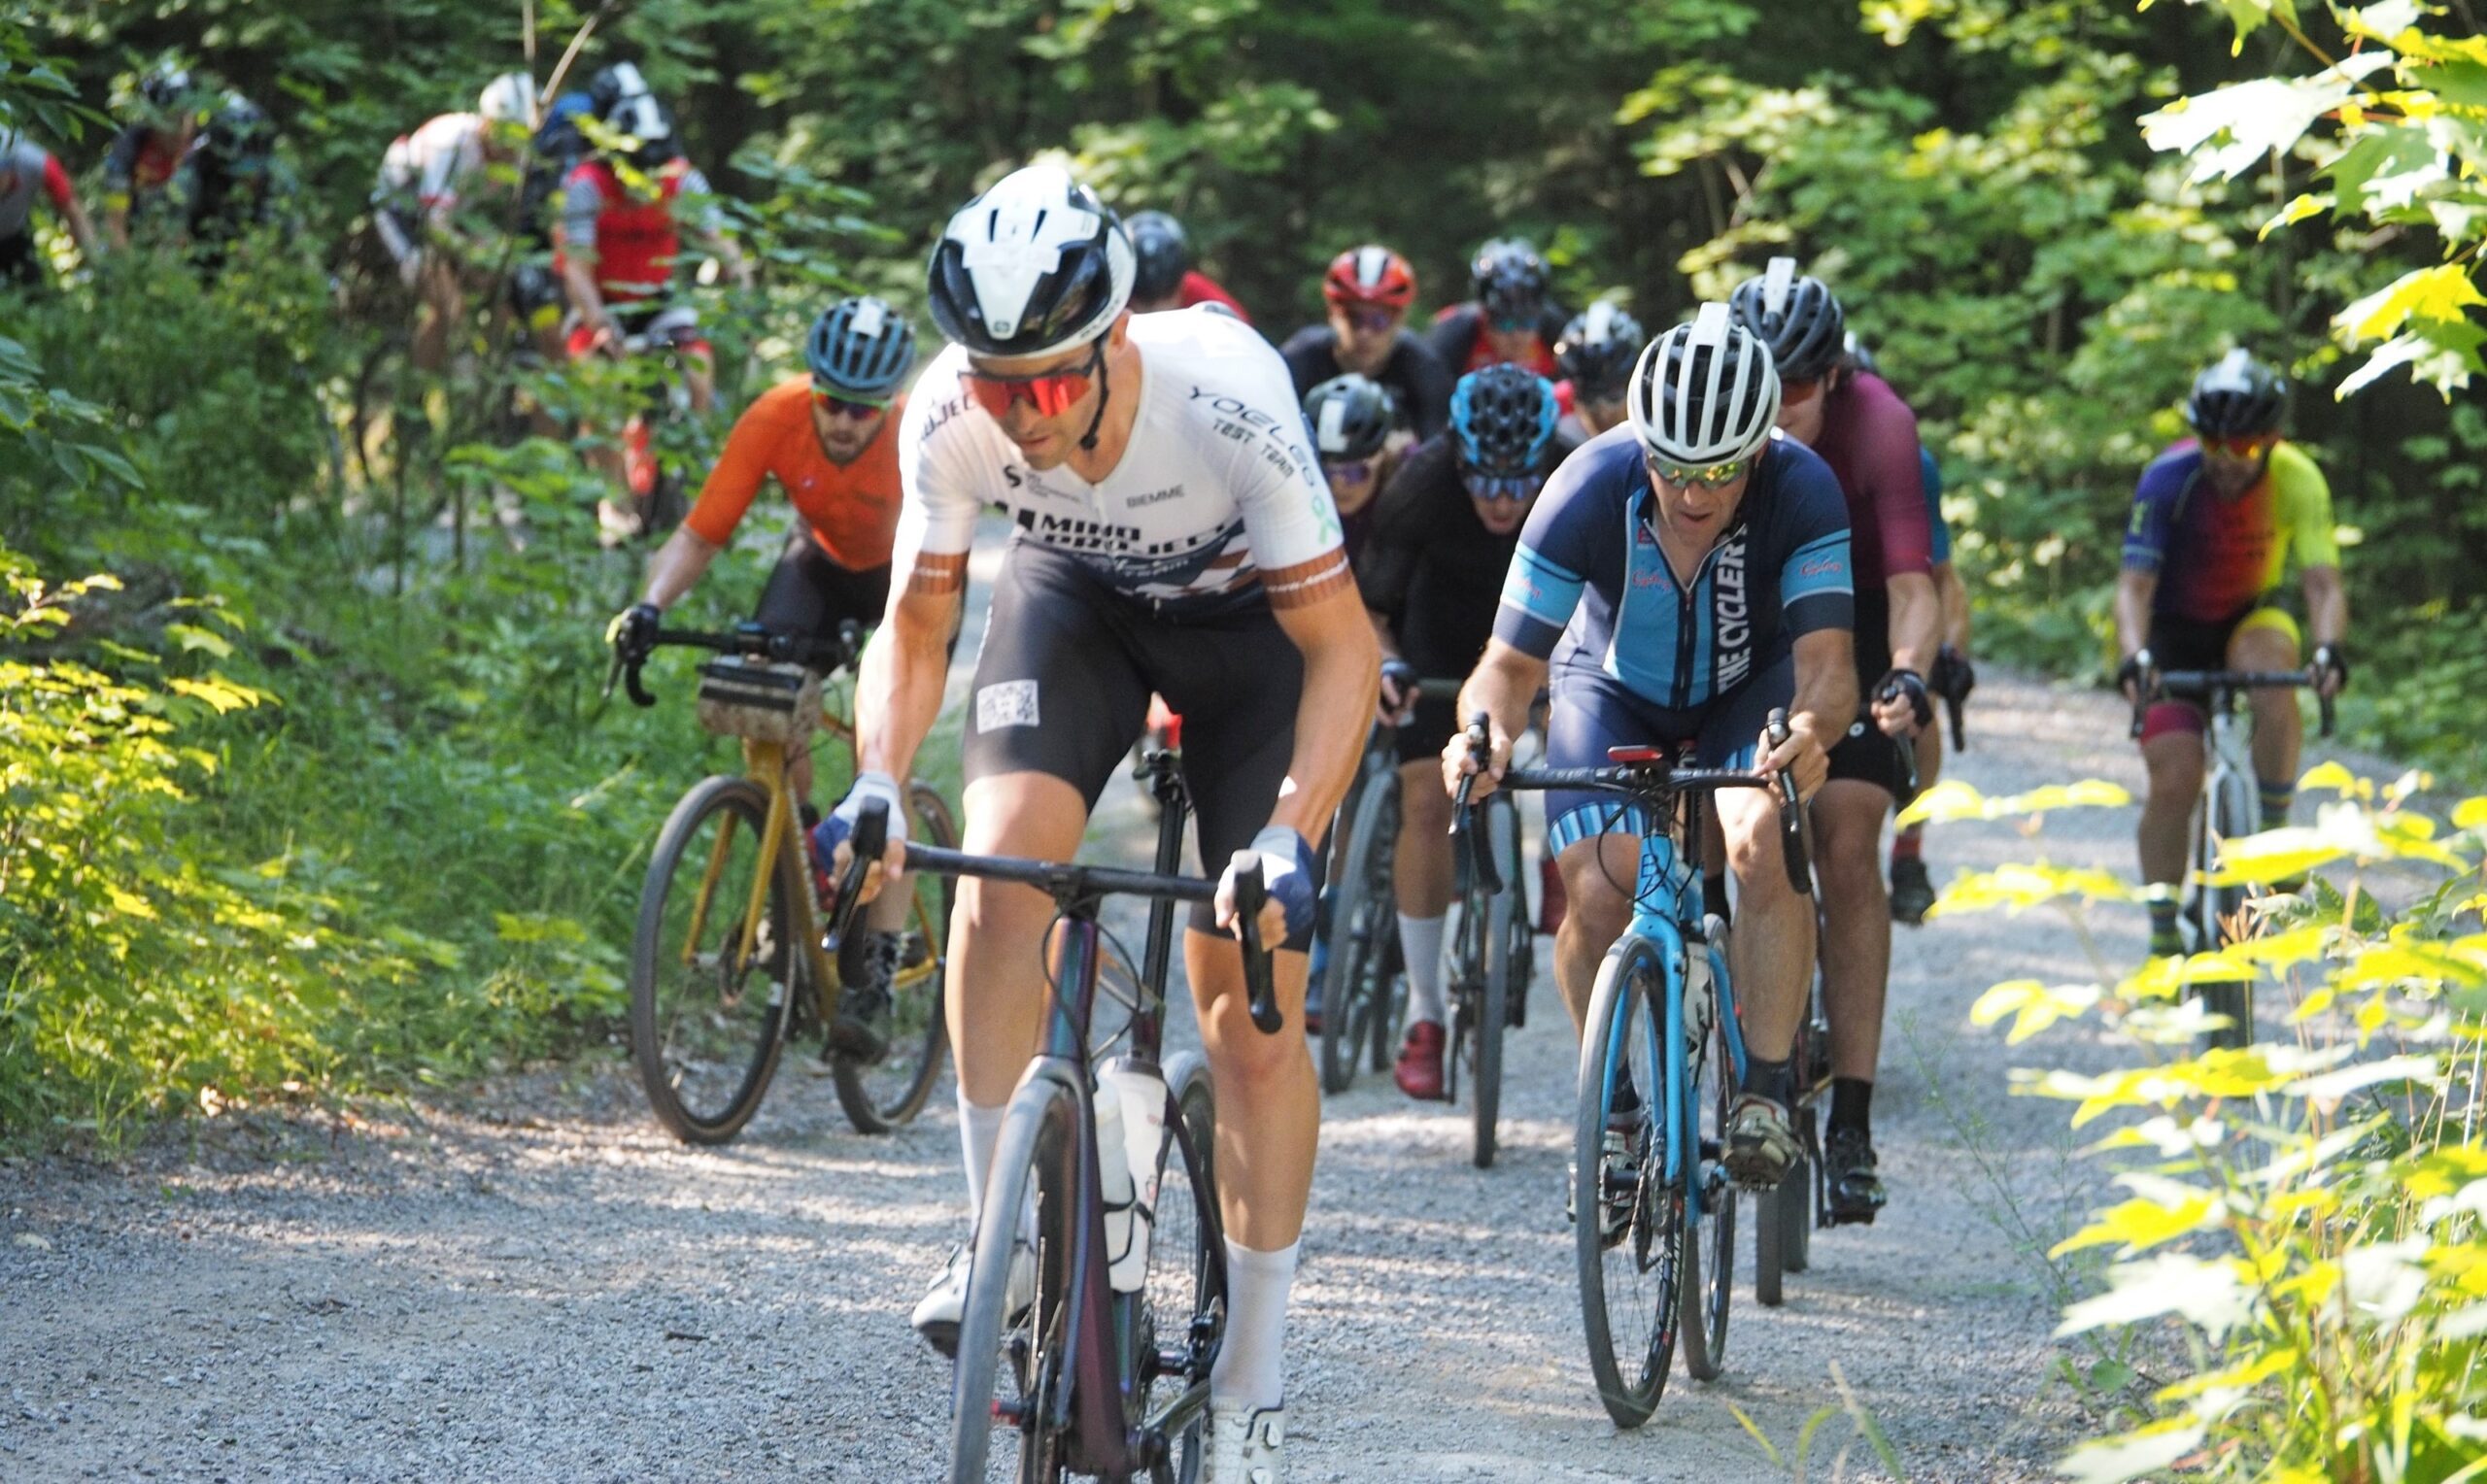 MY EXPERIENCE AT GRAVEL CUP CANADA 3